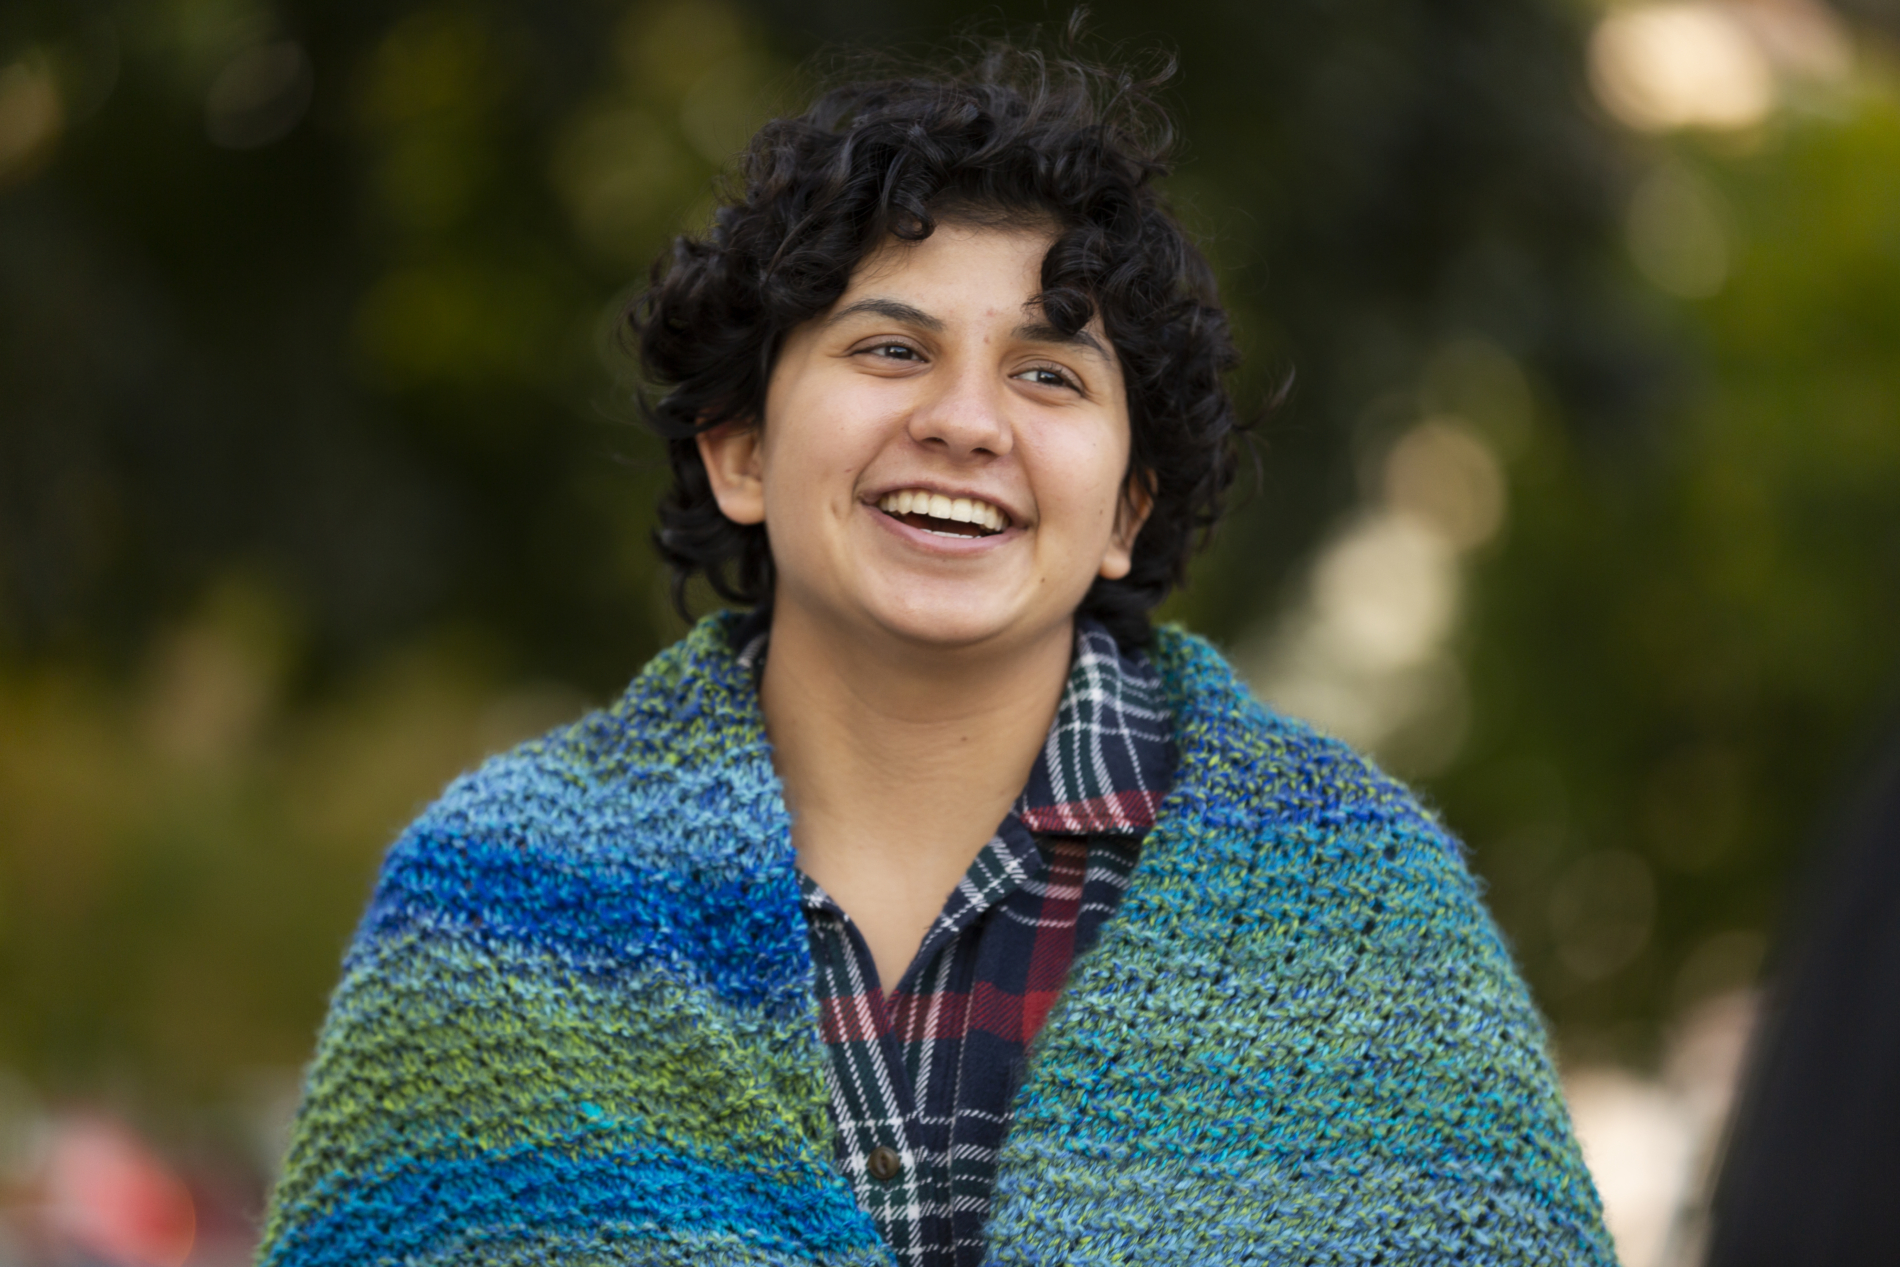 A woman wearing a colorful shawl smiles